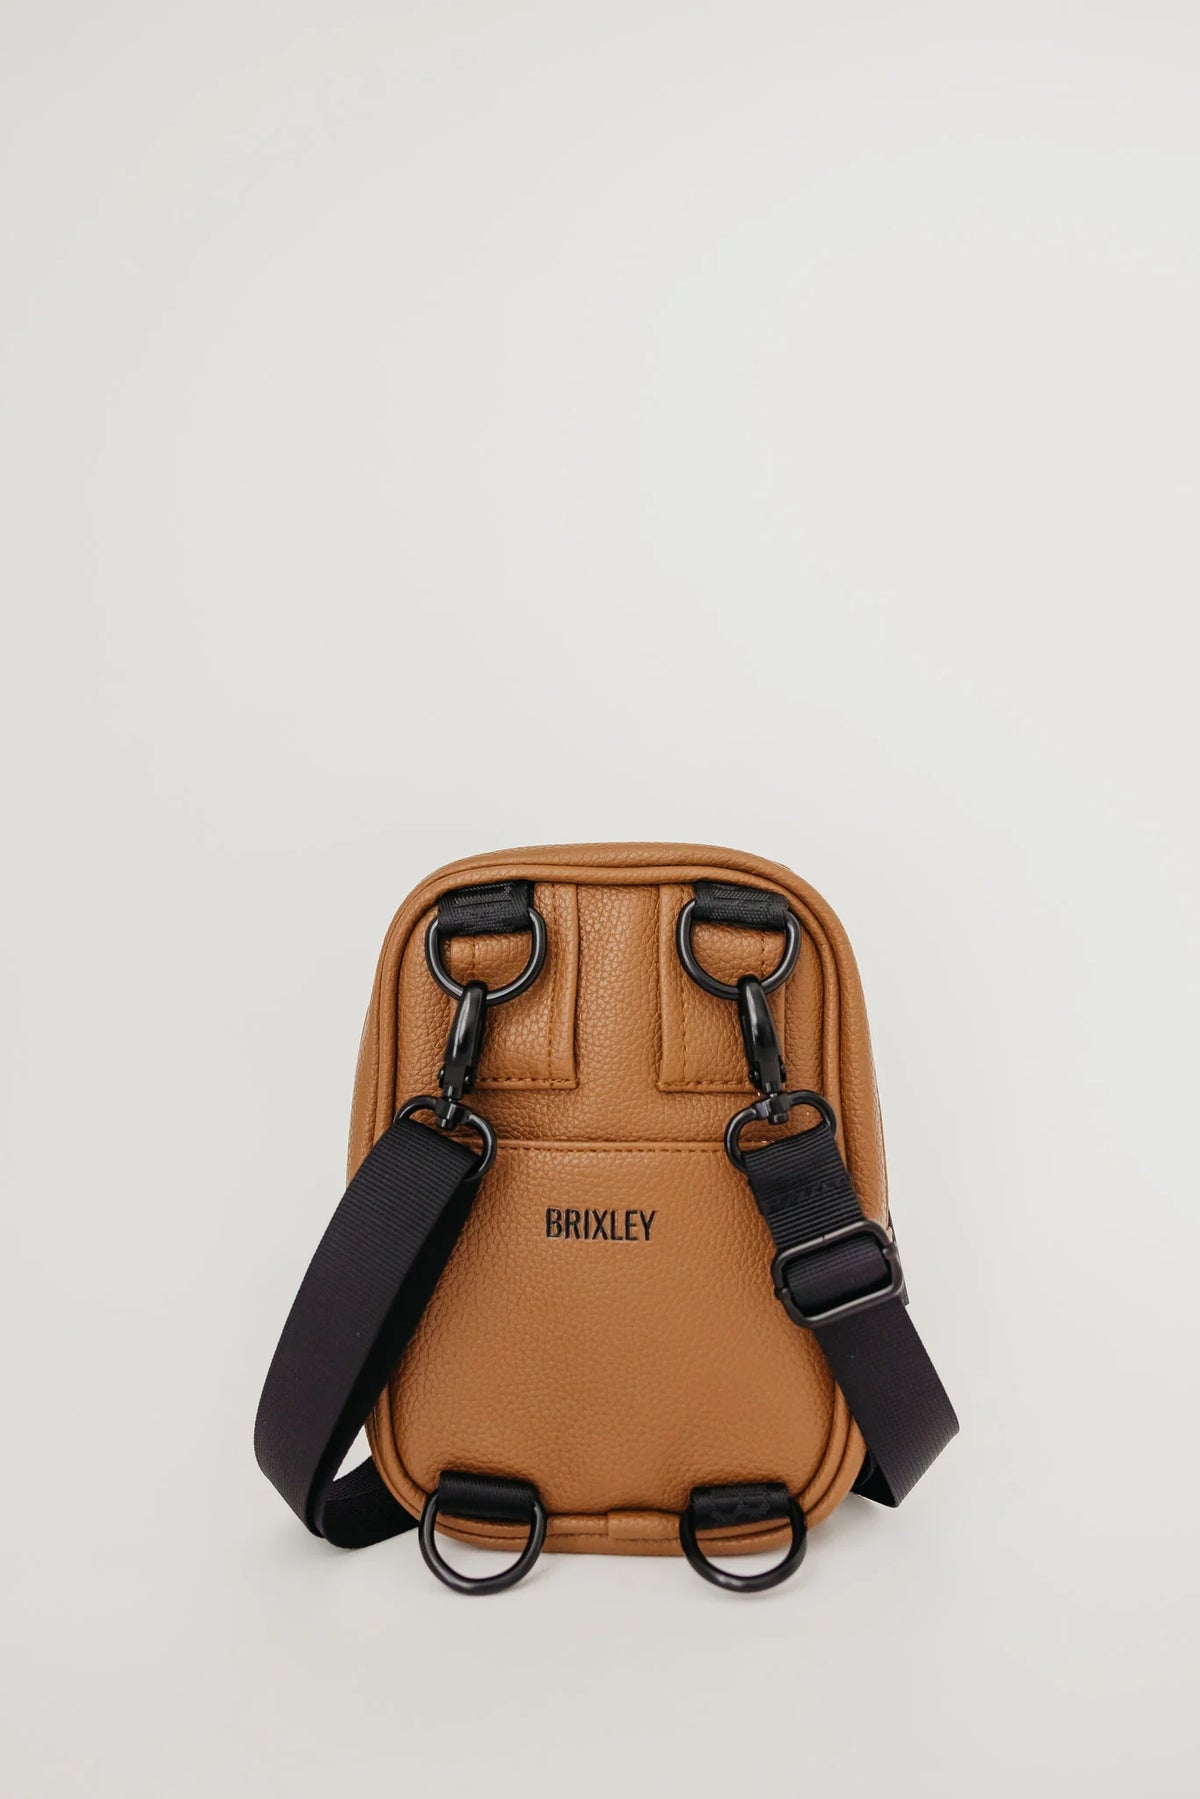 Brixley Bag - Leather Toffee